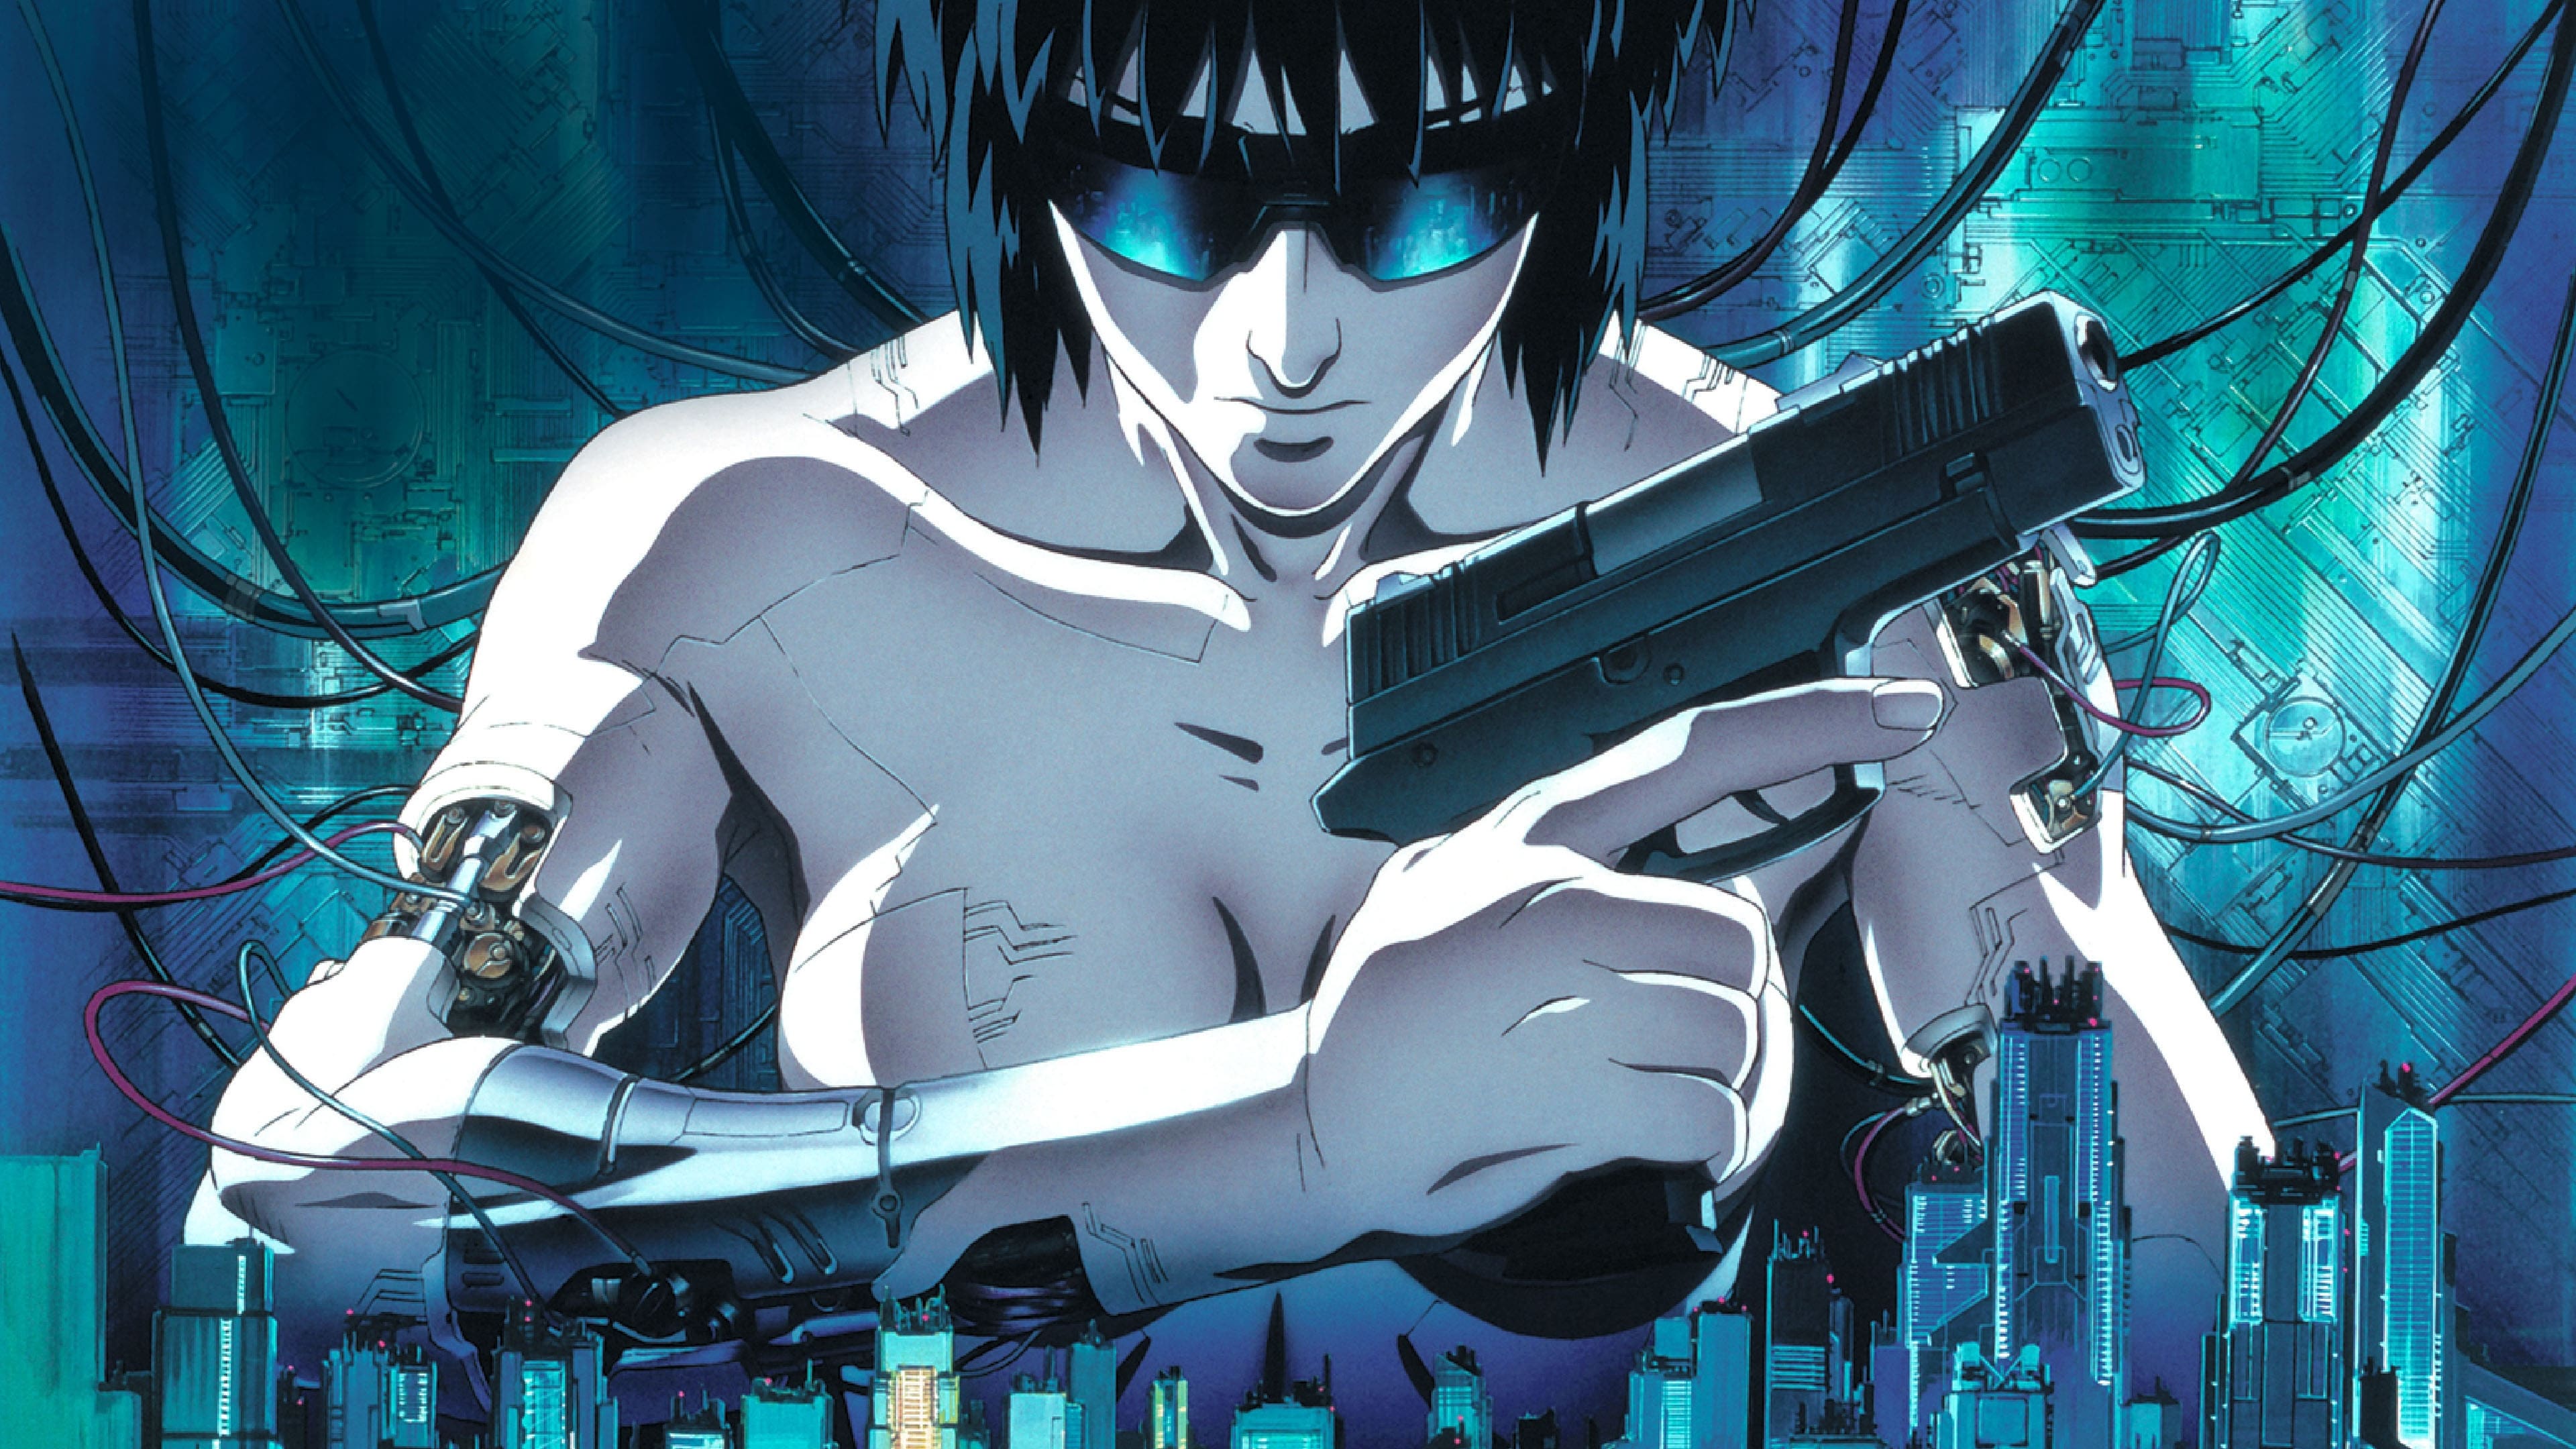 Banner Phim Vỏ Bọc Ma (Ghost in the Shell)